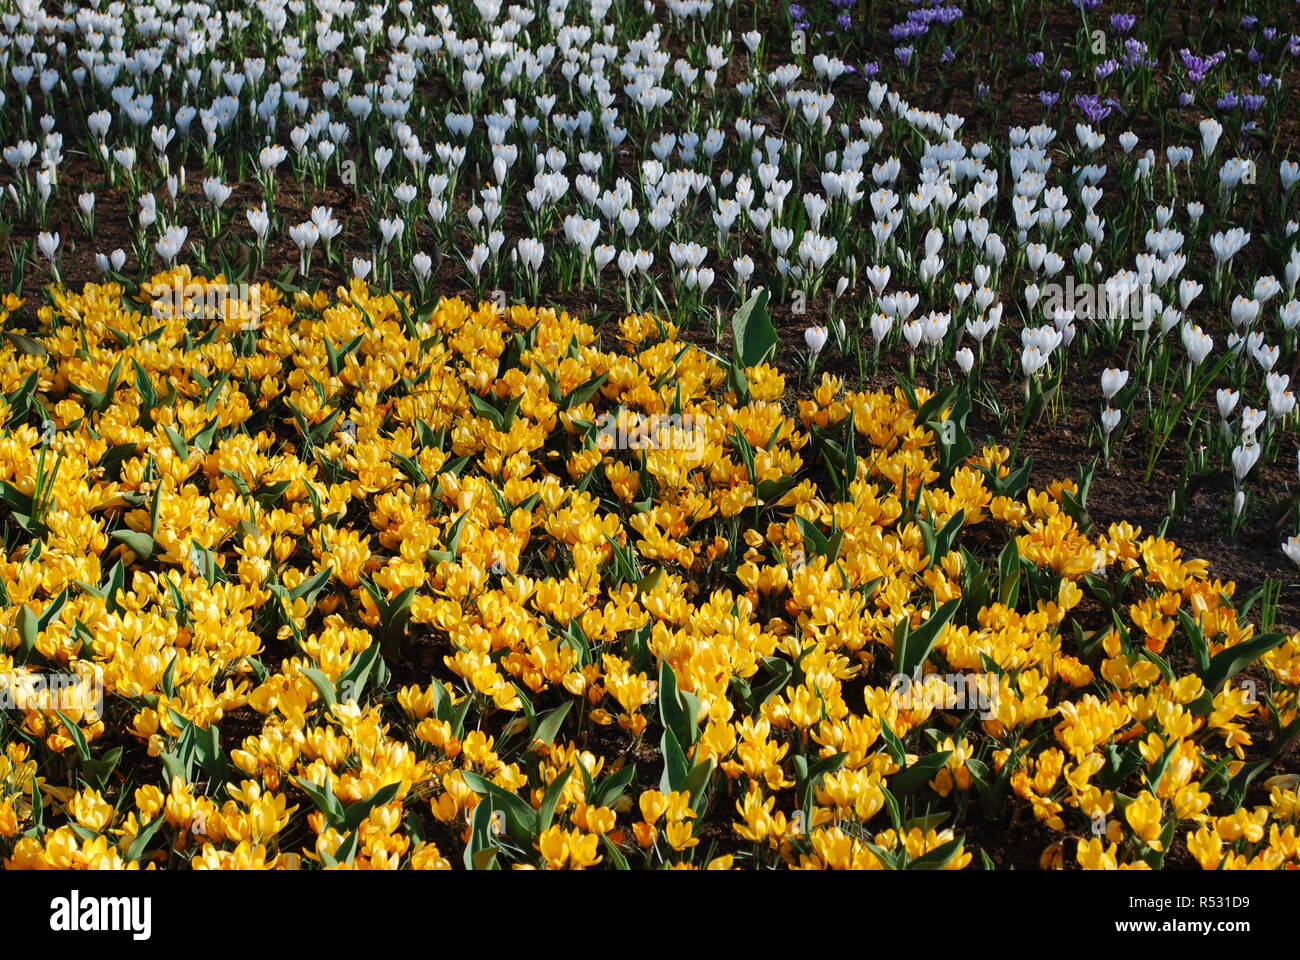 Crocus Orange Monarch and Jenne D'Arc grown in the park. Spring time in Netherlands. Stock Photo